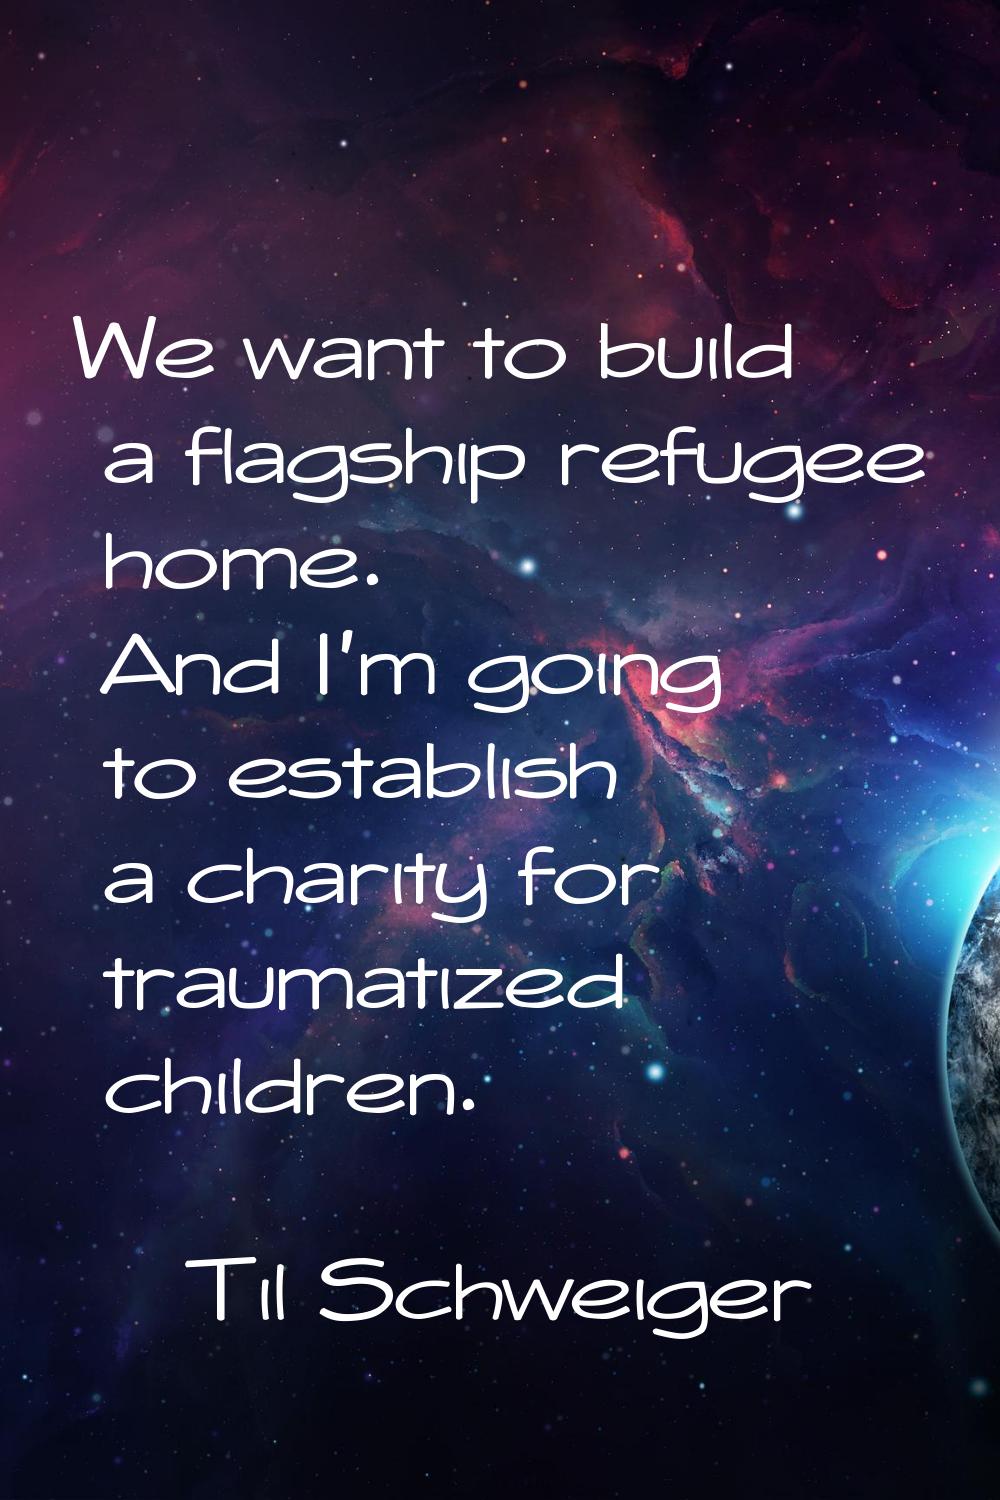 We want to build a flagship refugee home. And I'm going to establish a charity for traumatized chil